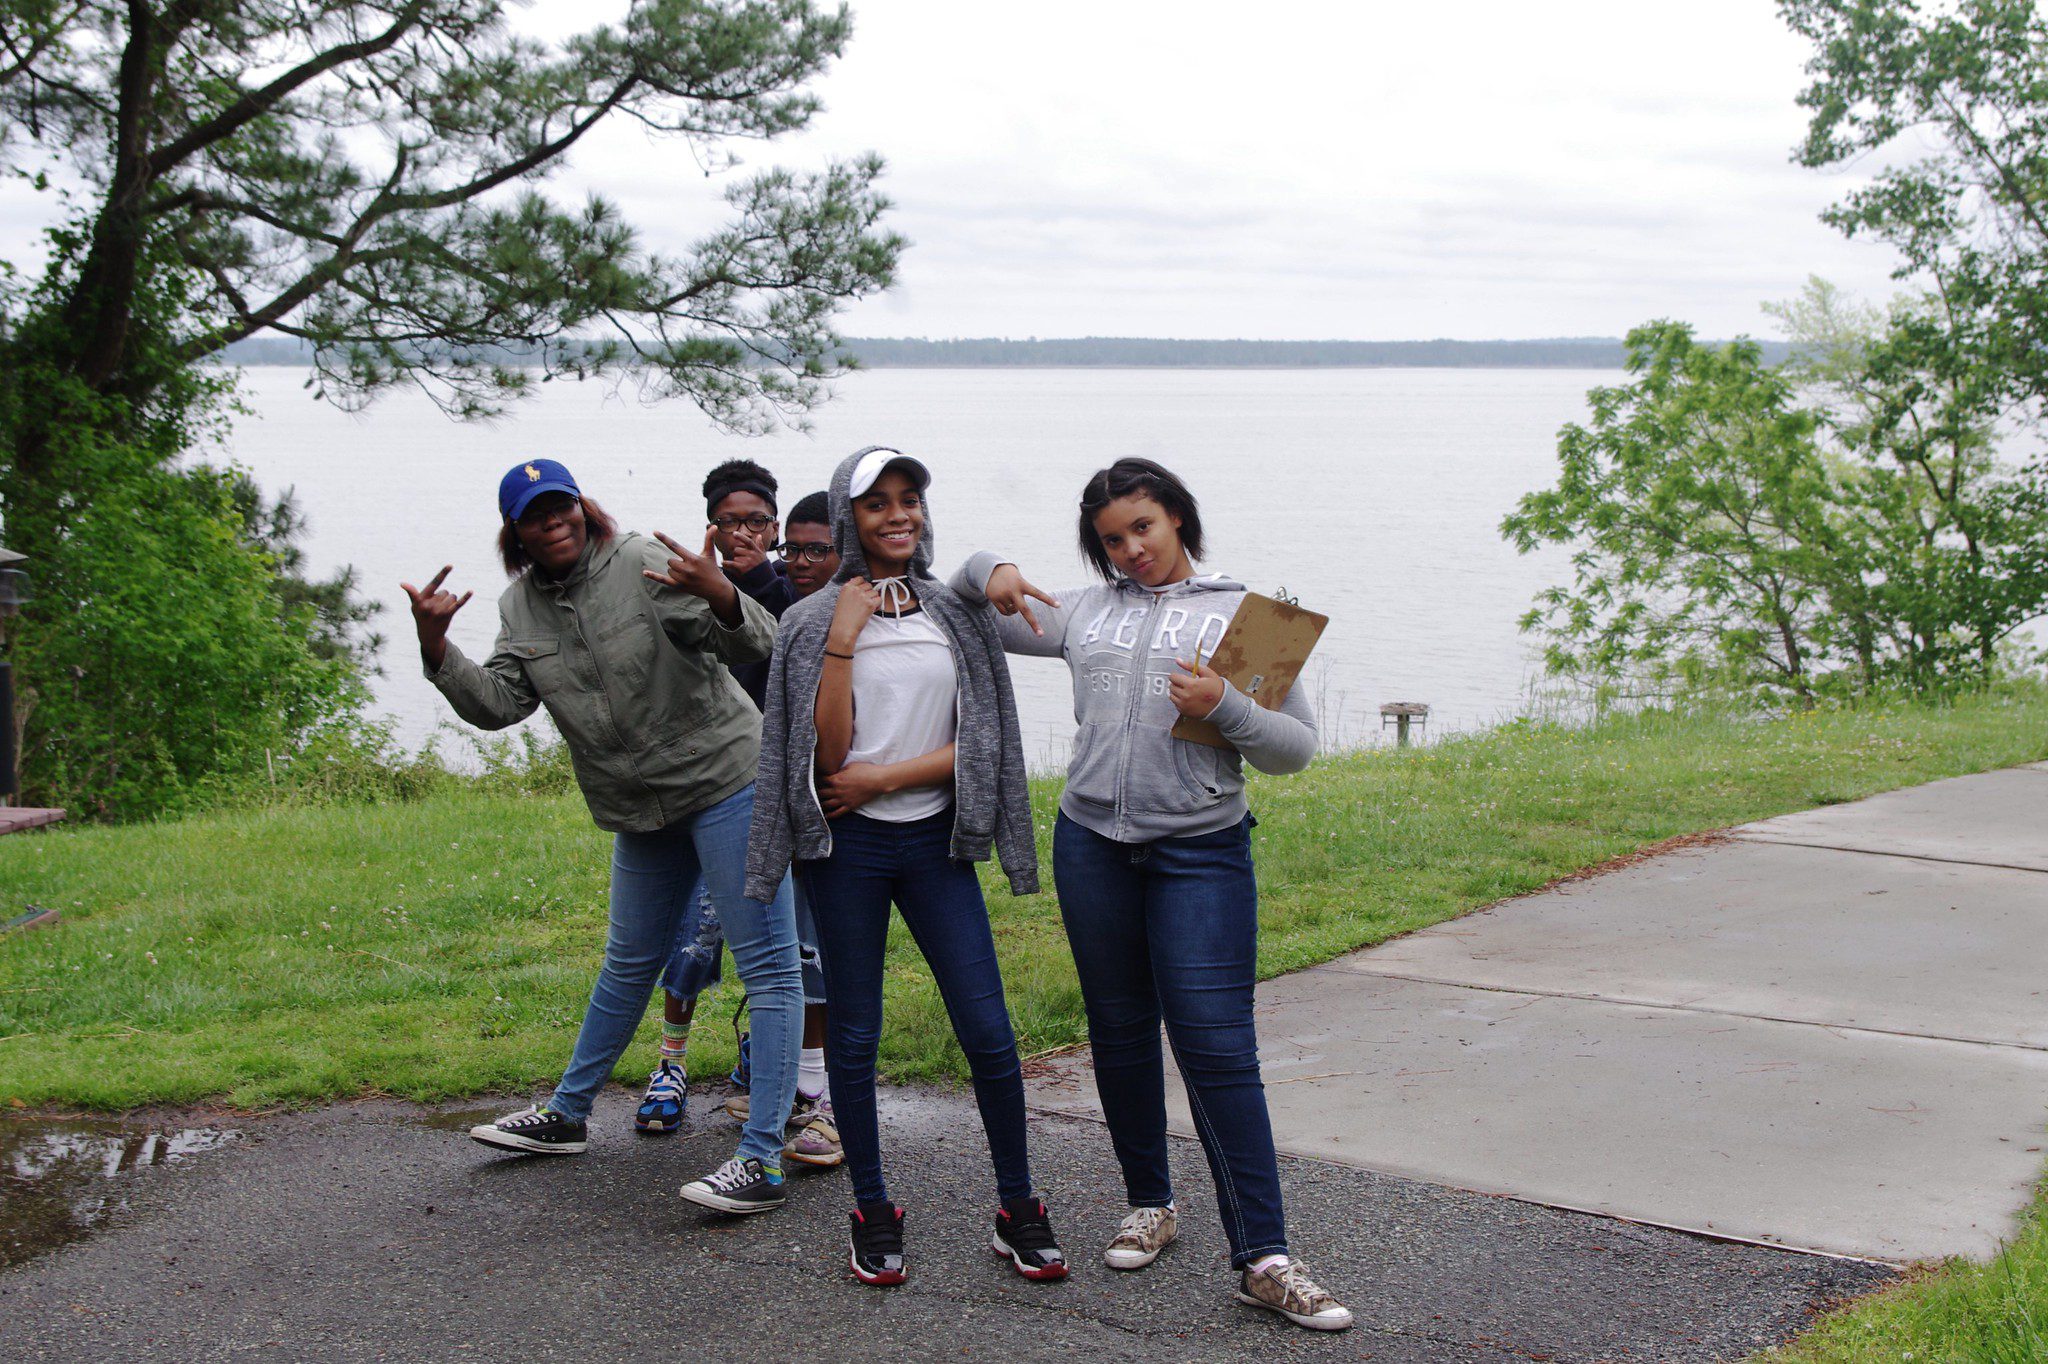 Students on a Chesapeake Bay area field trip.